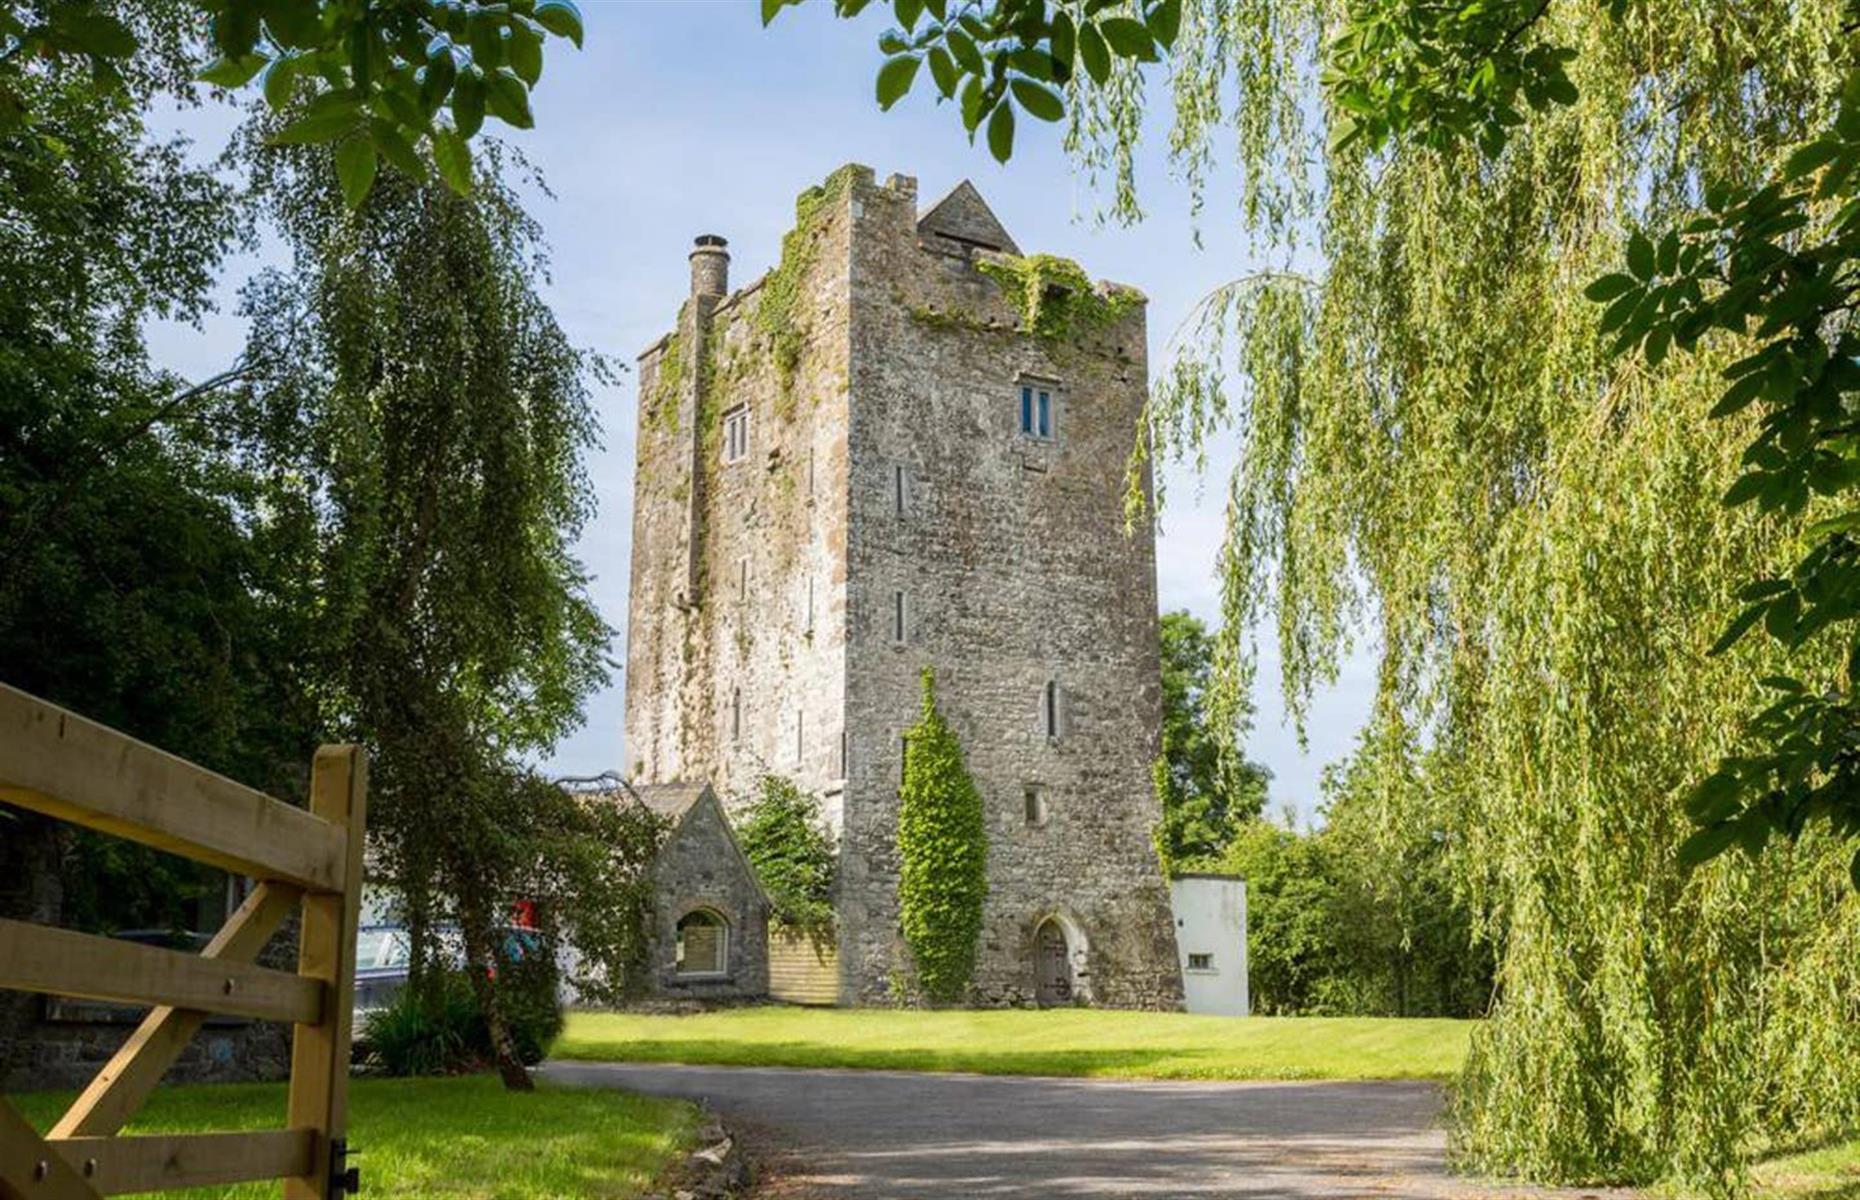 <p>Carefully restored over 25 years, <a href="https://www.airbnb.co.uk/rooms/7705110">this medieval 16th-century towerhouse</a> is set on beautiful and secluded grounds, yet is just a five-minute drive from the town of Kilkenny. To really get away from it all, guests can head up to the four-bedroom tower which doesn't have a TV or Wi-Fi, and enjoy the beautiful countryside that surrounds the property.</p>